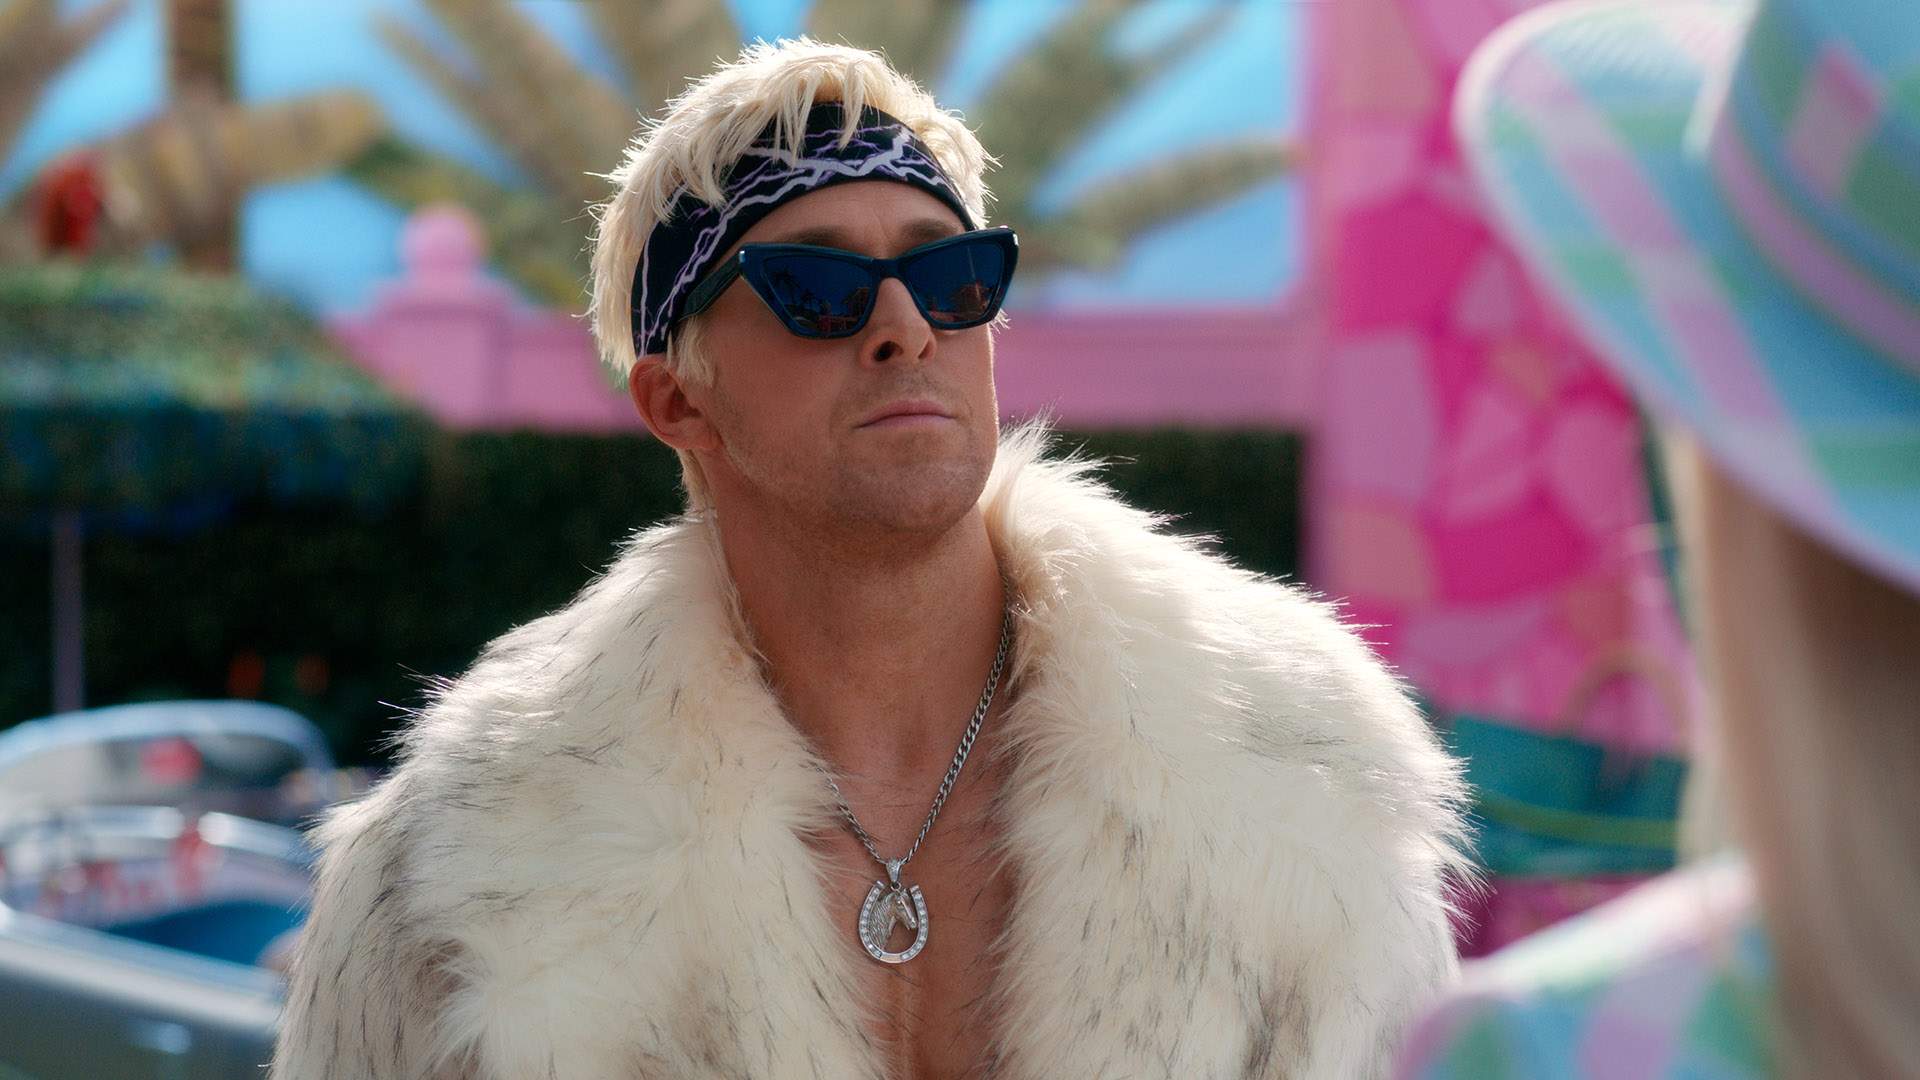 Ryan Gosling Sings About the Struggles of Being Ken in the Latest 'Barbie' Trailer